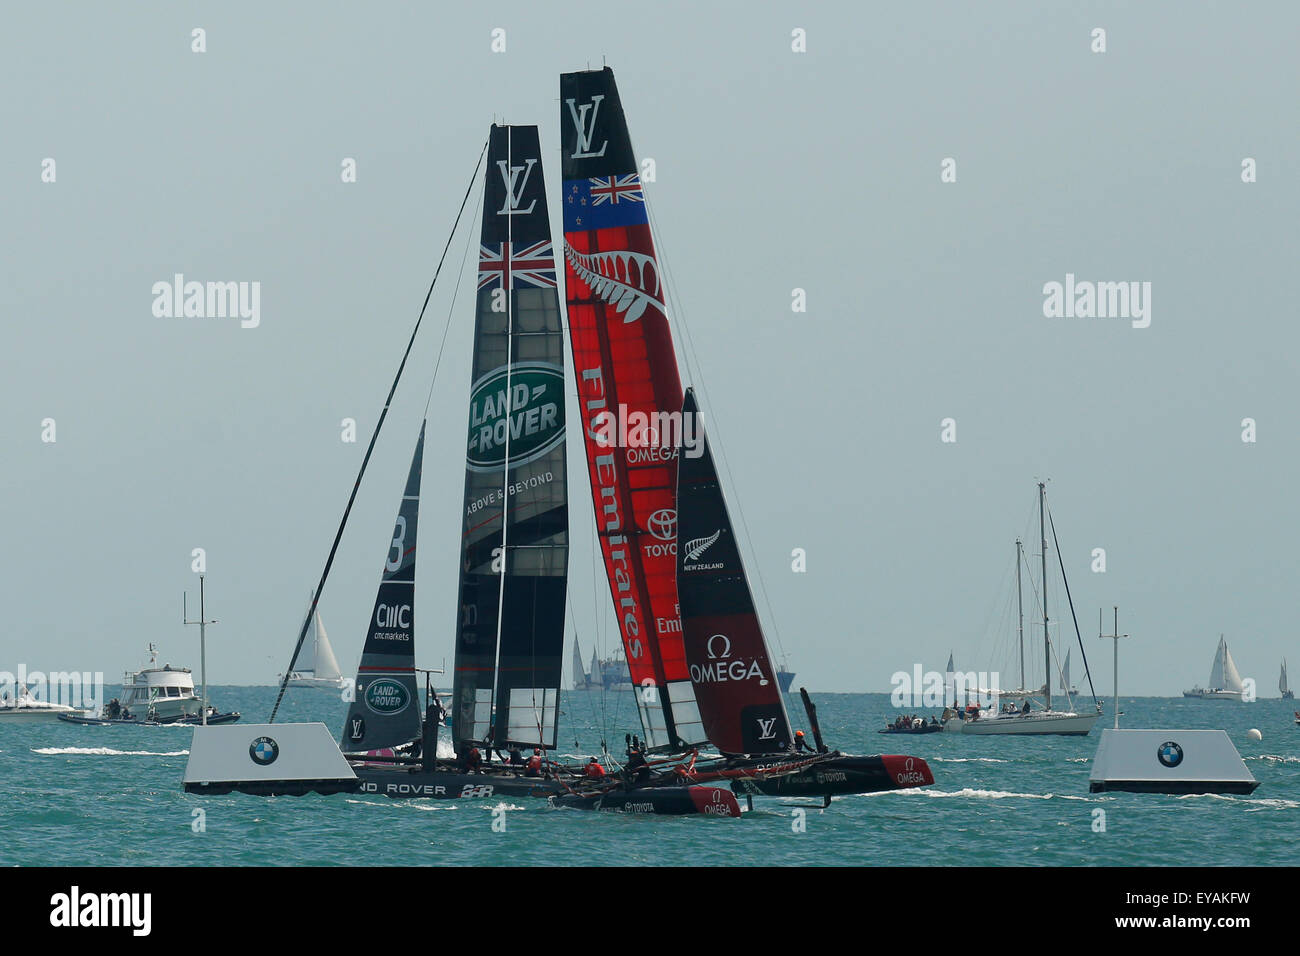 Portsmouth, UK. 25th July, 2015. Competing teams participate (L-R)Britain's Land Rover BAR (Ben Ainslie Racing) and Emirates New Zealand compete in the first official race of the 35th America's Cup World Series Races at Portsmouth in Hampshire, UK Saturday July 25, 2015. The 2015 Portsmouth racing of the Louis Vuitton America's Cup World Series counts towards the qualifiers and playoffs which determine the challenger to compete against the title holders Oracle Team USA in 2017. Credit:  Luke MacGregor/Alamy Live News Stock Photo